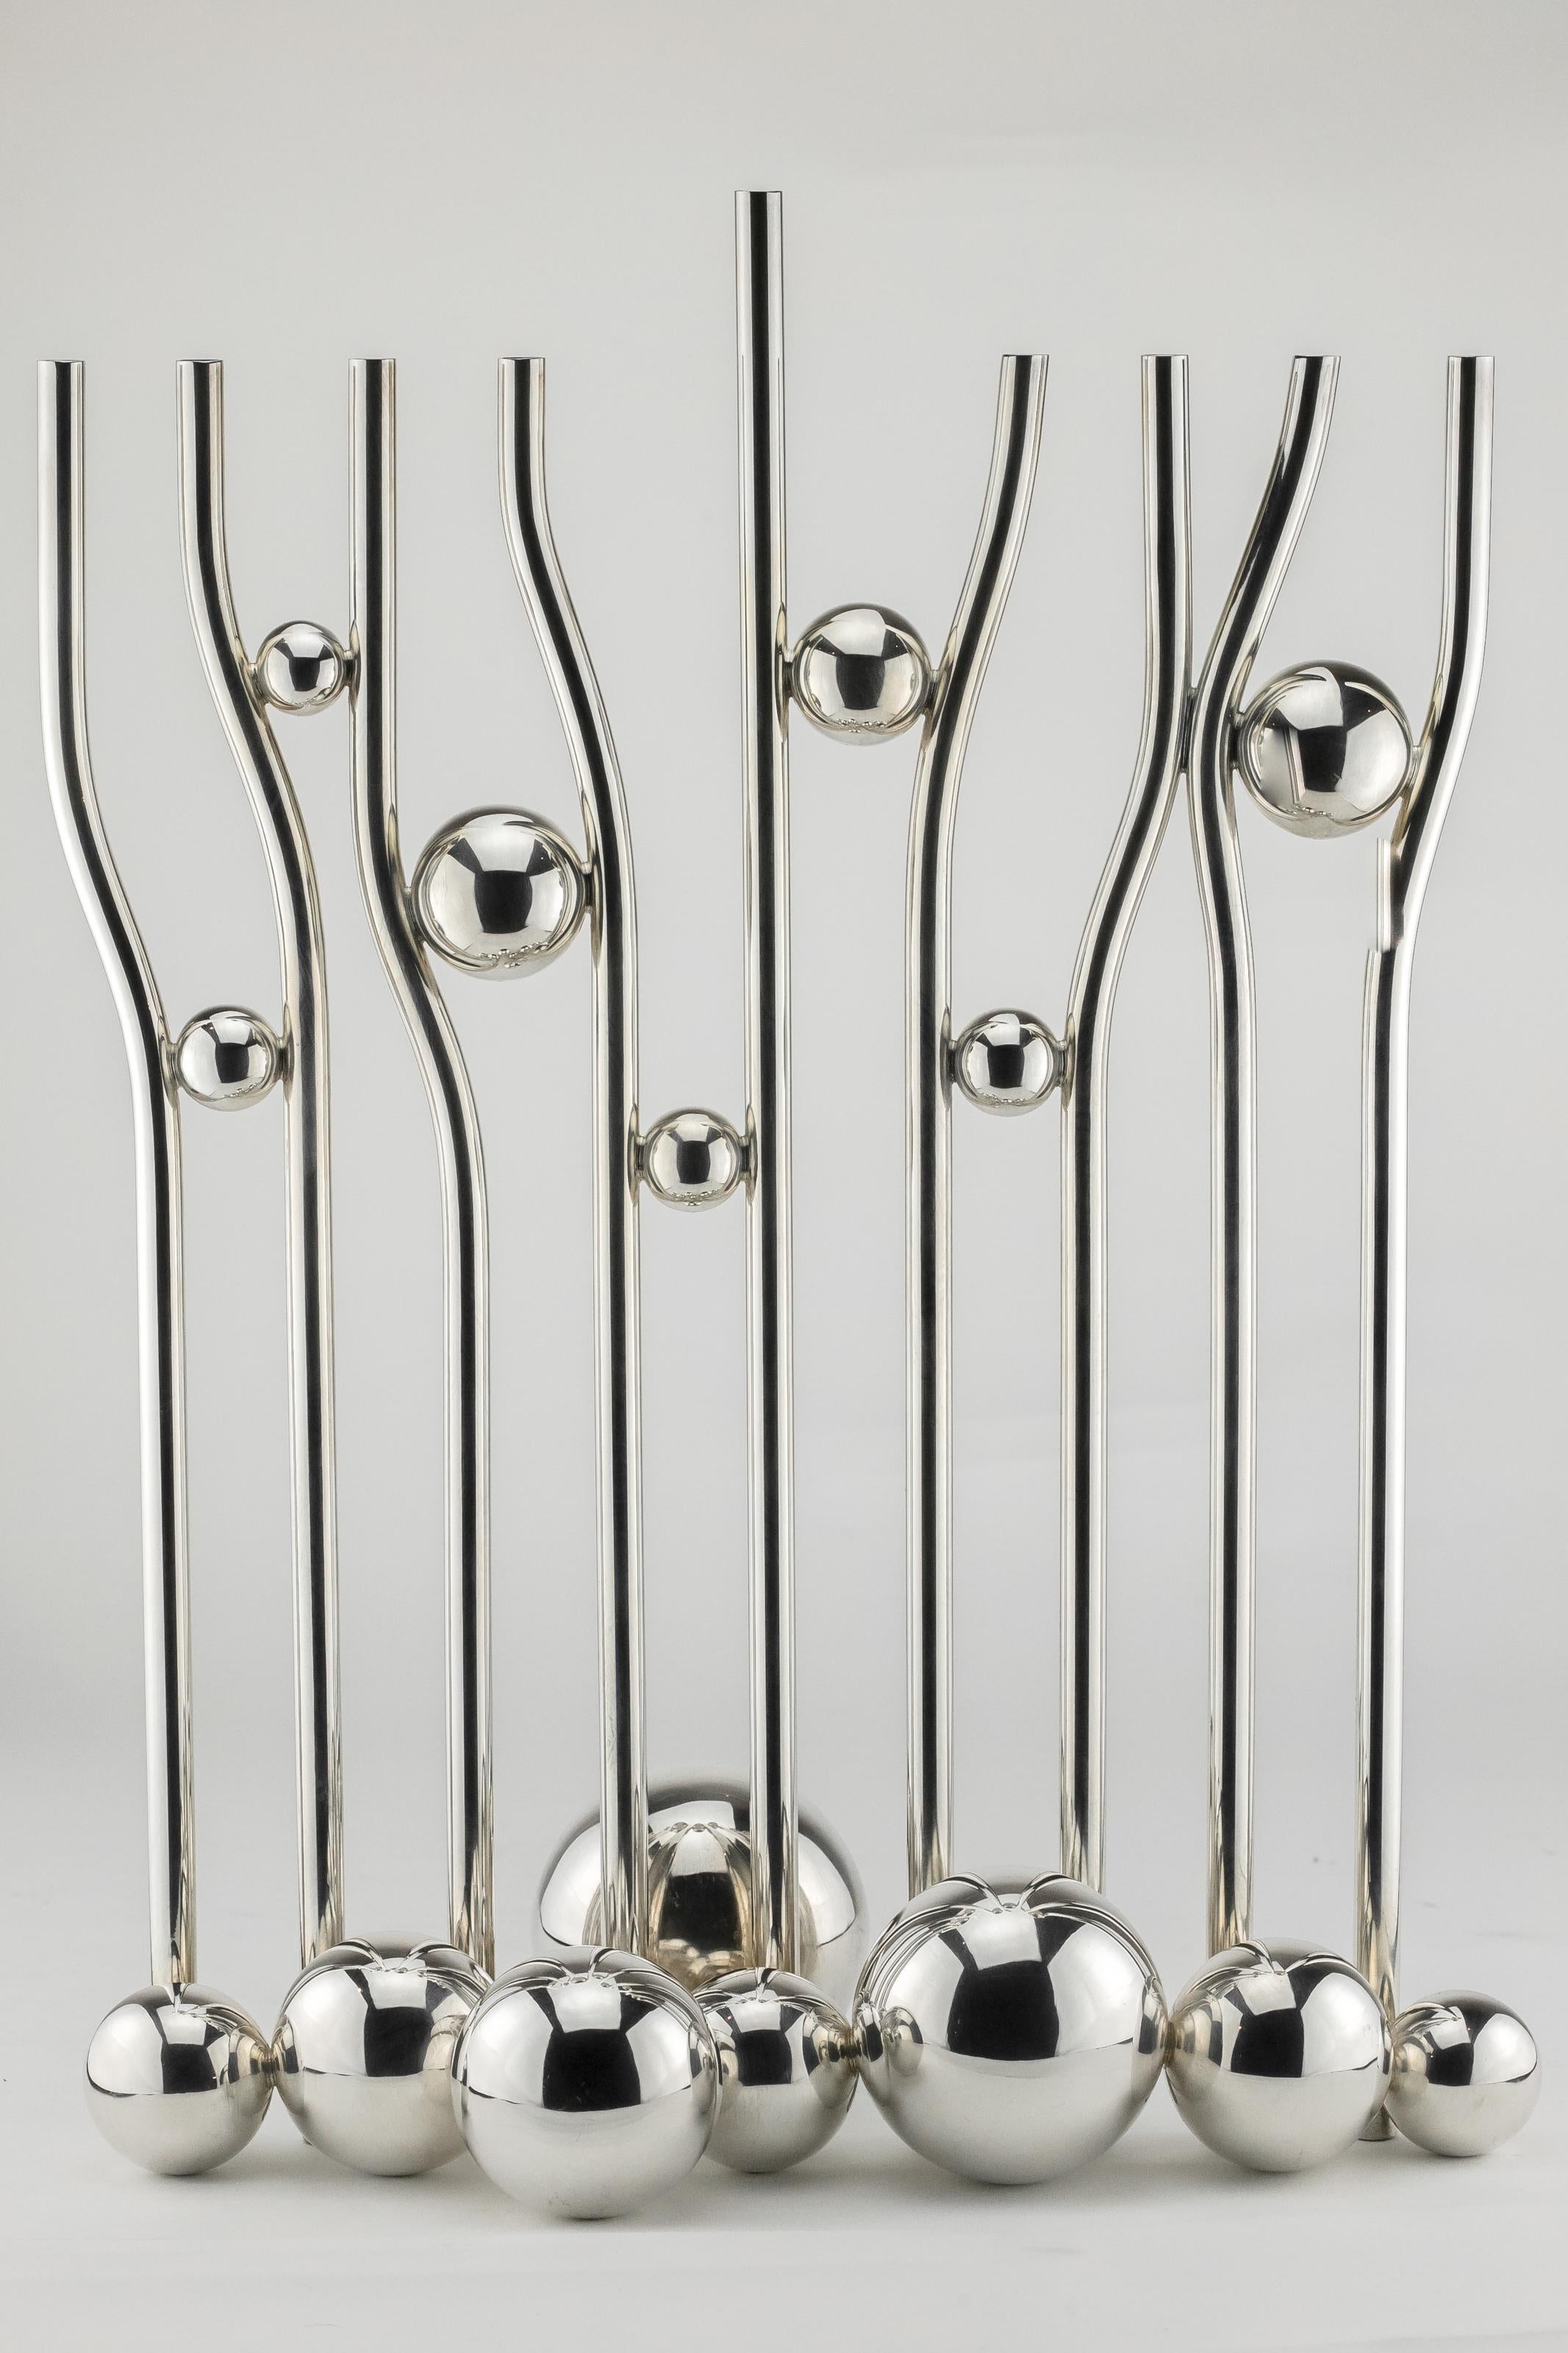 Sterling silver Hanukkah Lamp, Arie Ofir, Jerusalem, Israel, circa 1980
Designed in Modern Style. Nine silver tubes divided by seven silver balls and support by eight silver balls at the base. 
Hallmarked in Hebrew and English; Arie Ofir, Jerusalem,